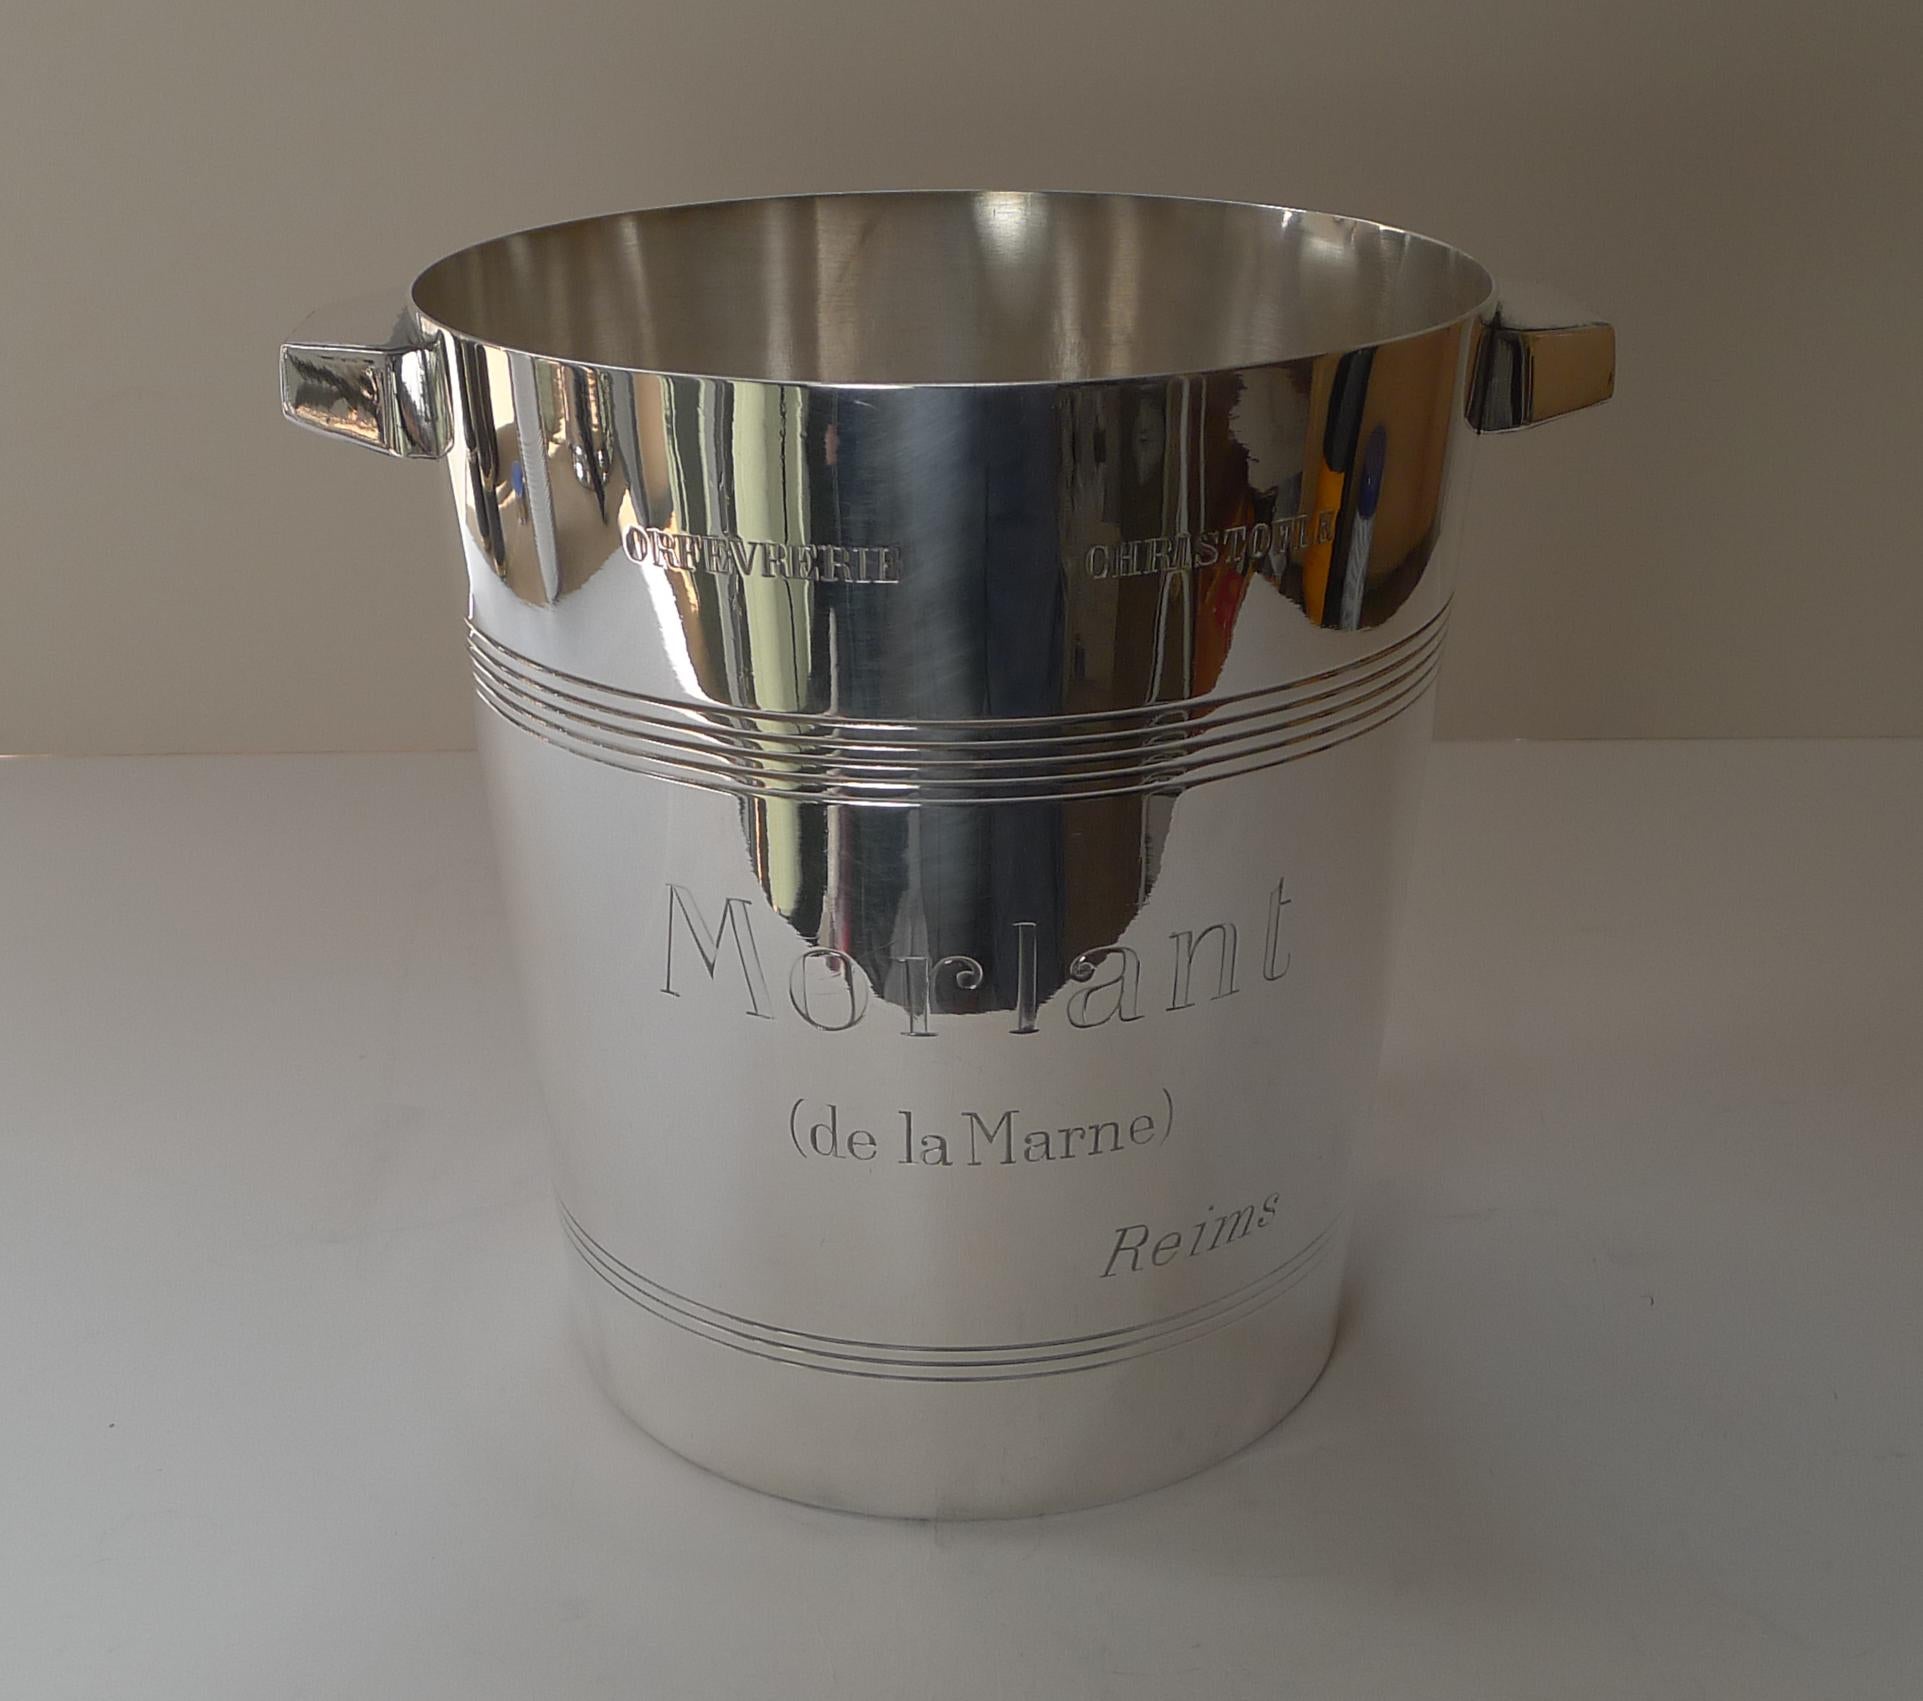 This example was made for the Morlant Champagne company, which dates it to the 1930's. On both sides, the bucket is engraved 